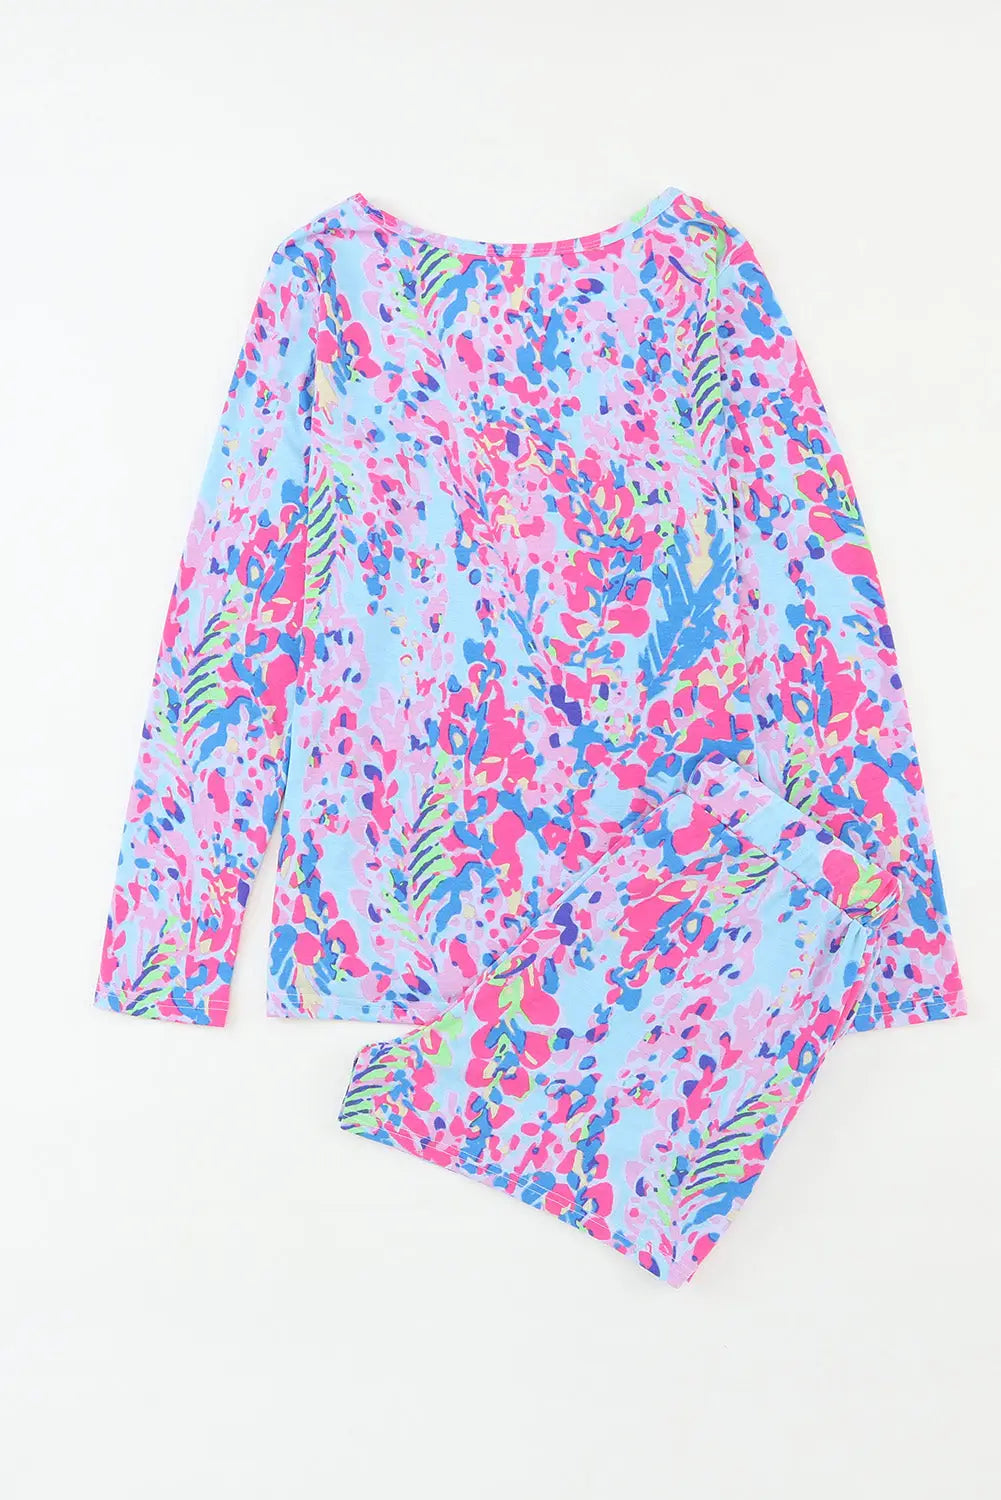 Sky blue floral long sleeve top and drawstring shorts set - loungewear